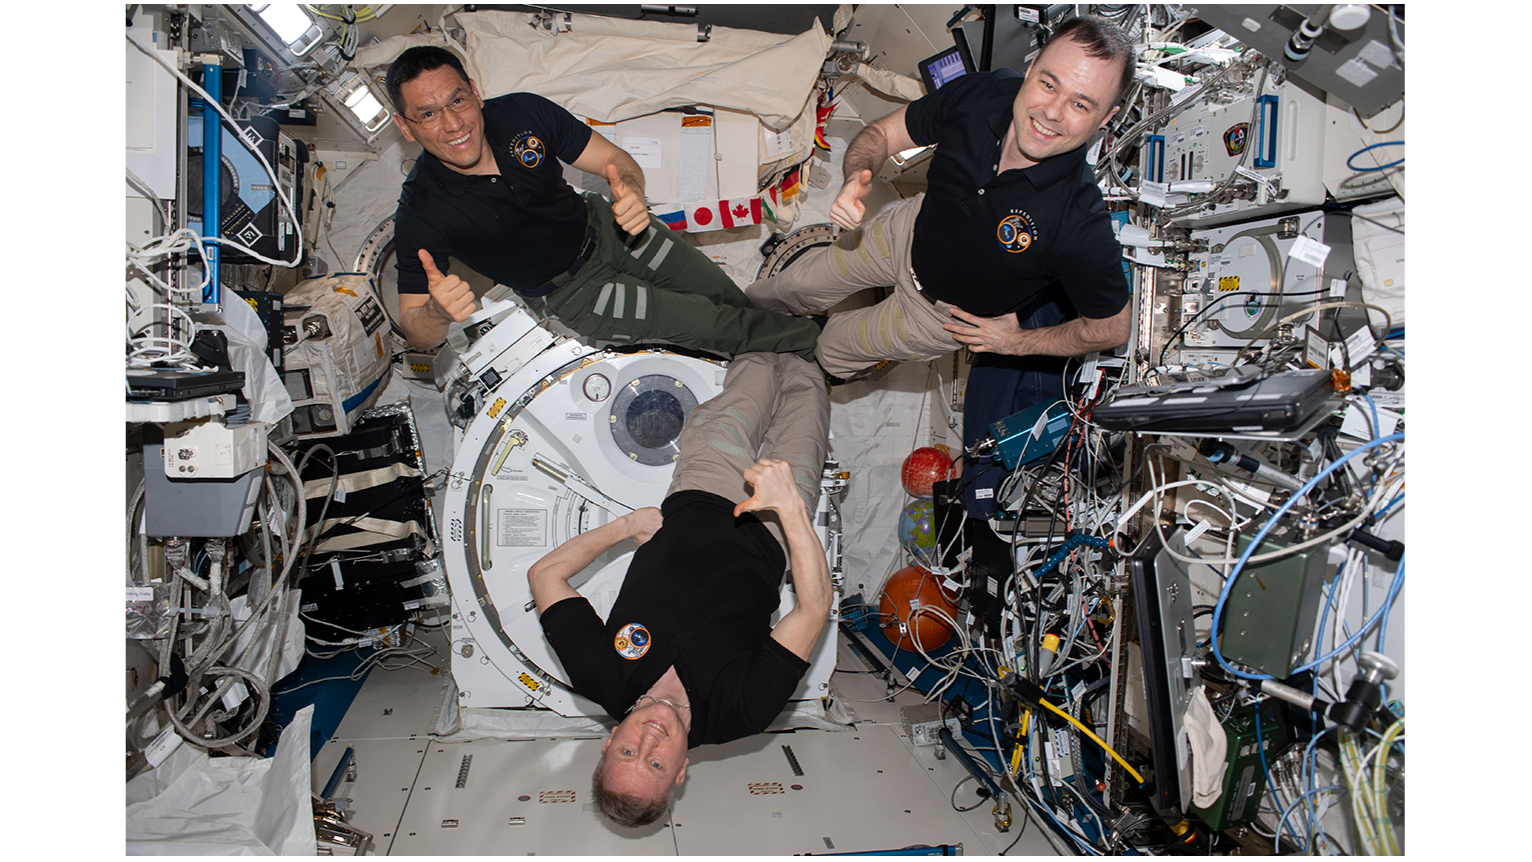 Watch a NASA astronaut and 2 cosmonauts return to Earth after 1 year in space on Sept. 27